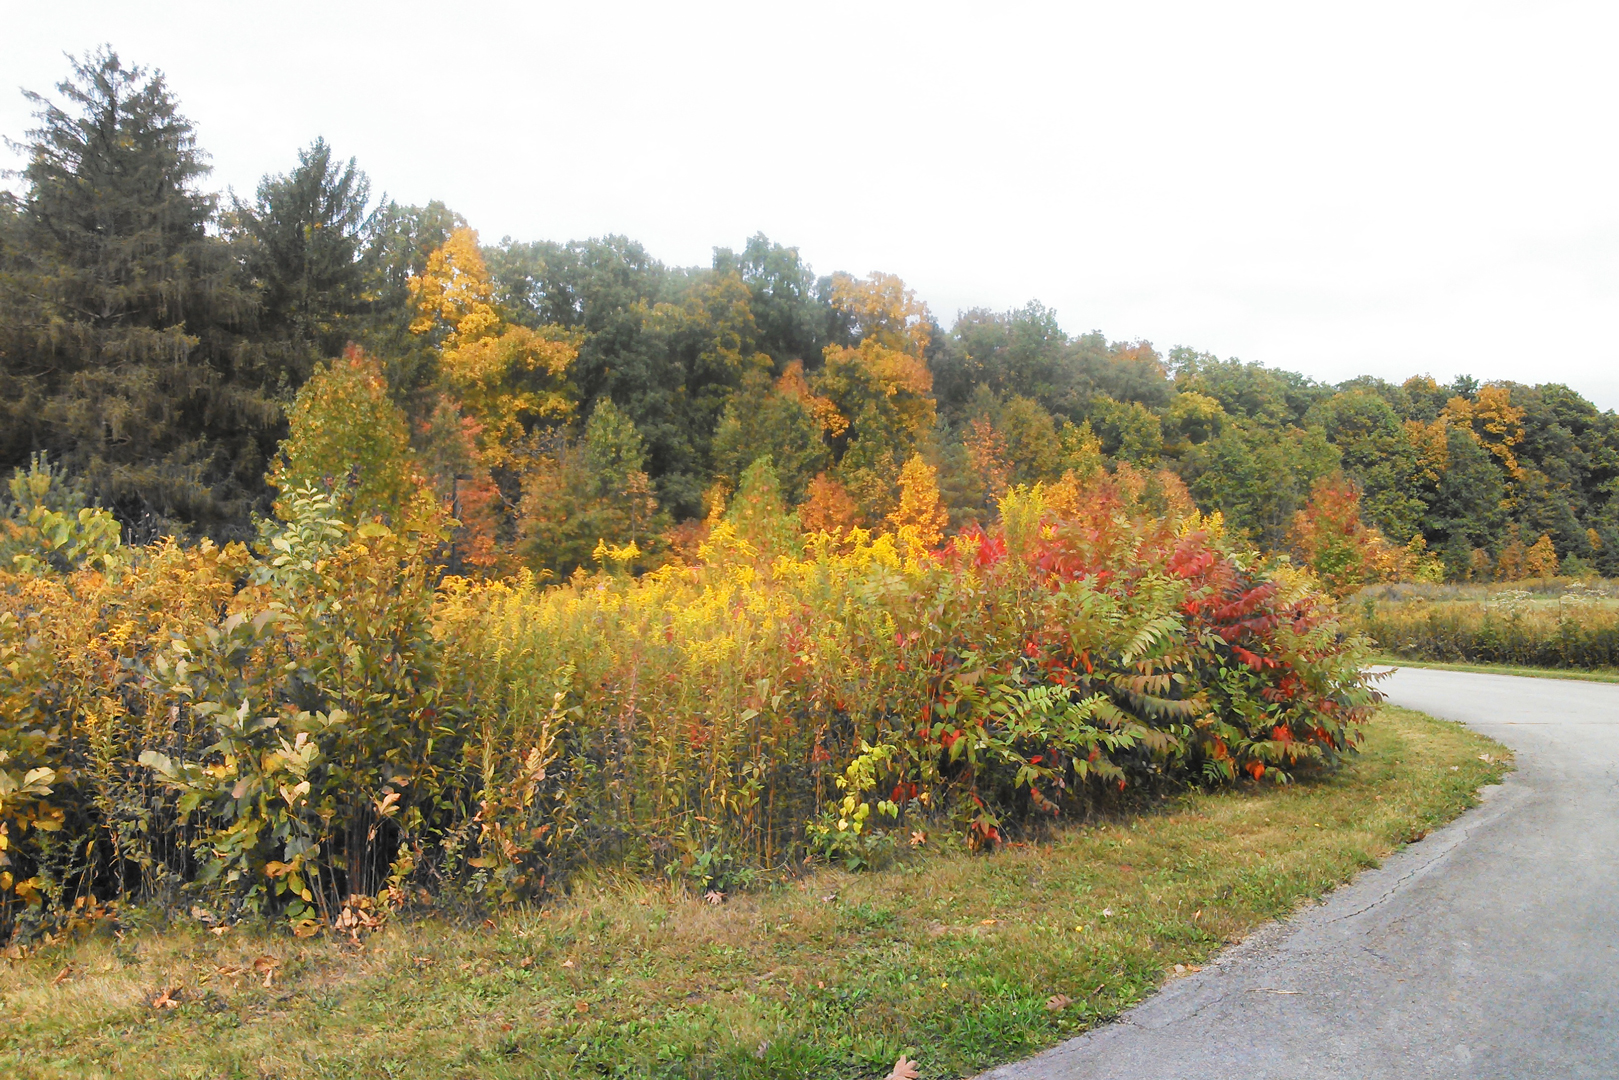 Autumn color on the Fall Driving Tour route to the Sugarbush Day Camp at Blendon Woods. Photo by Dan Bissonette